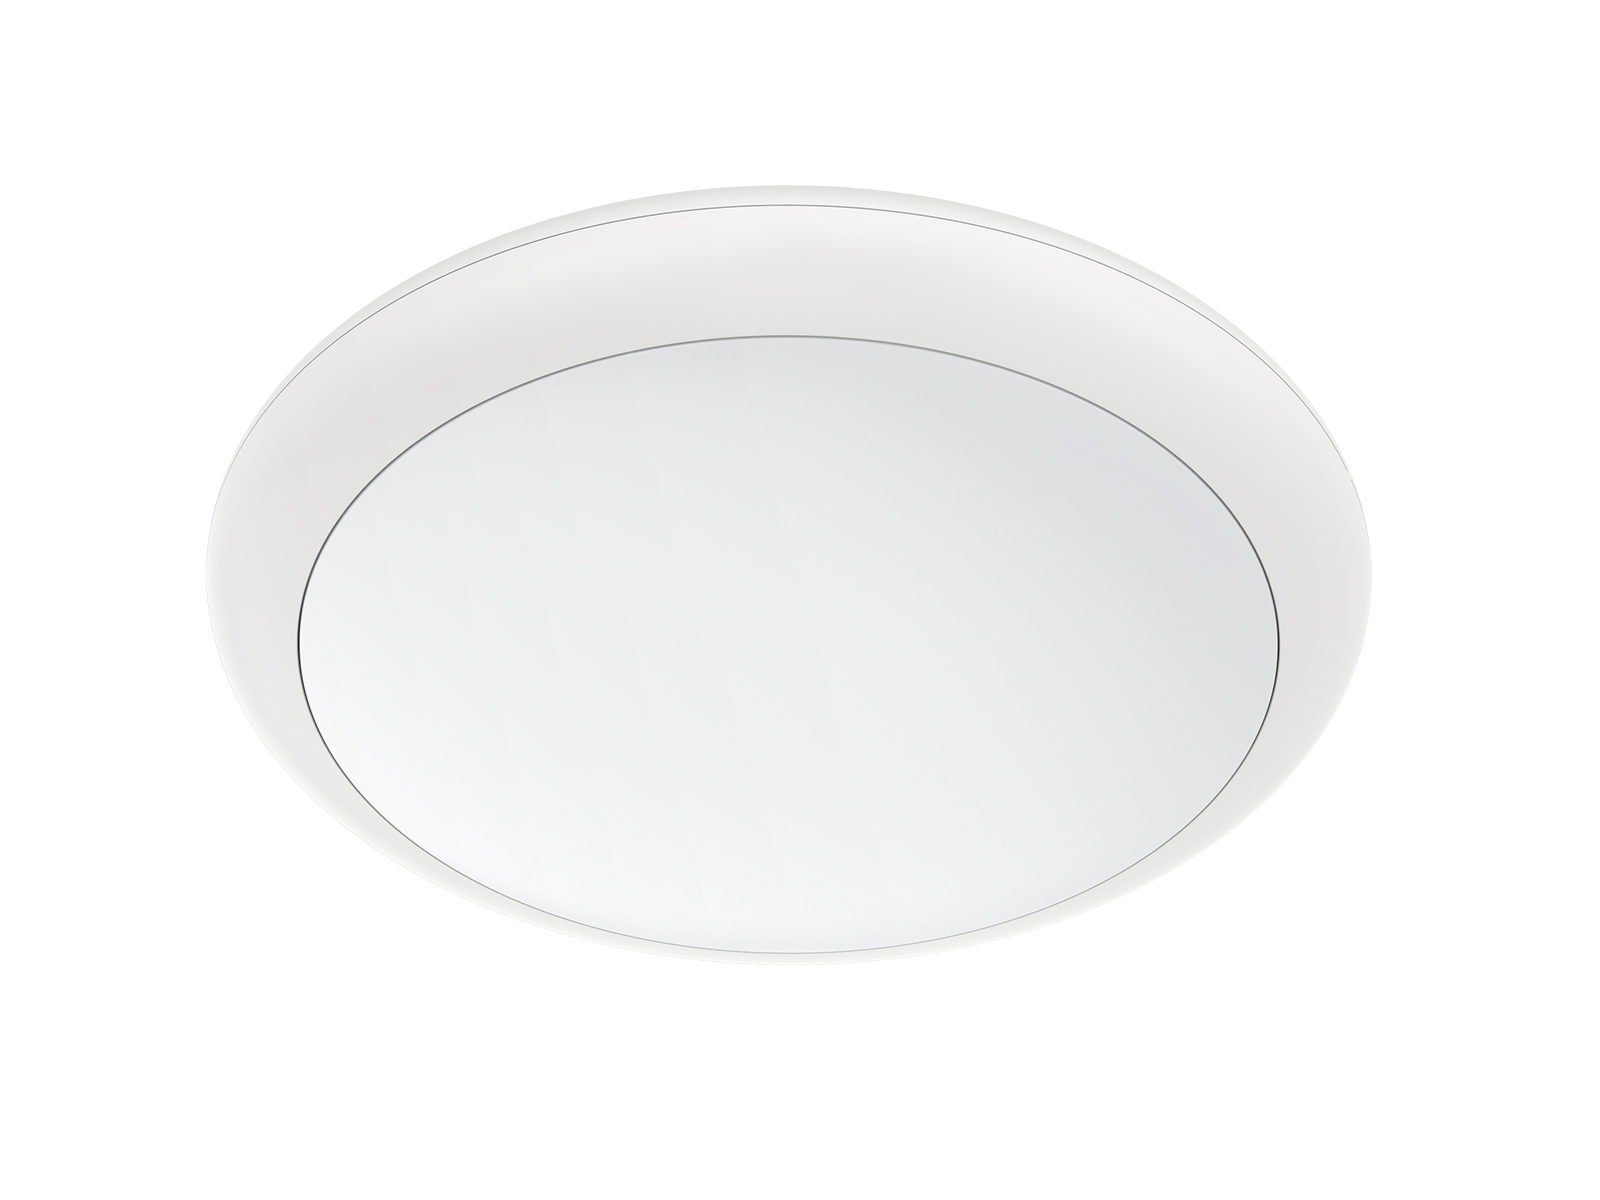 AL45 IP65 Surface Mounted Ceiling Light